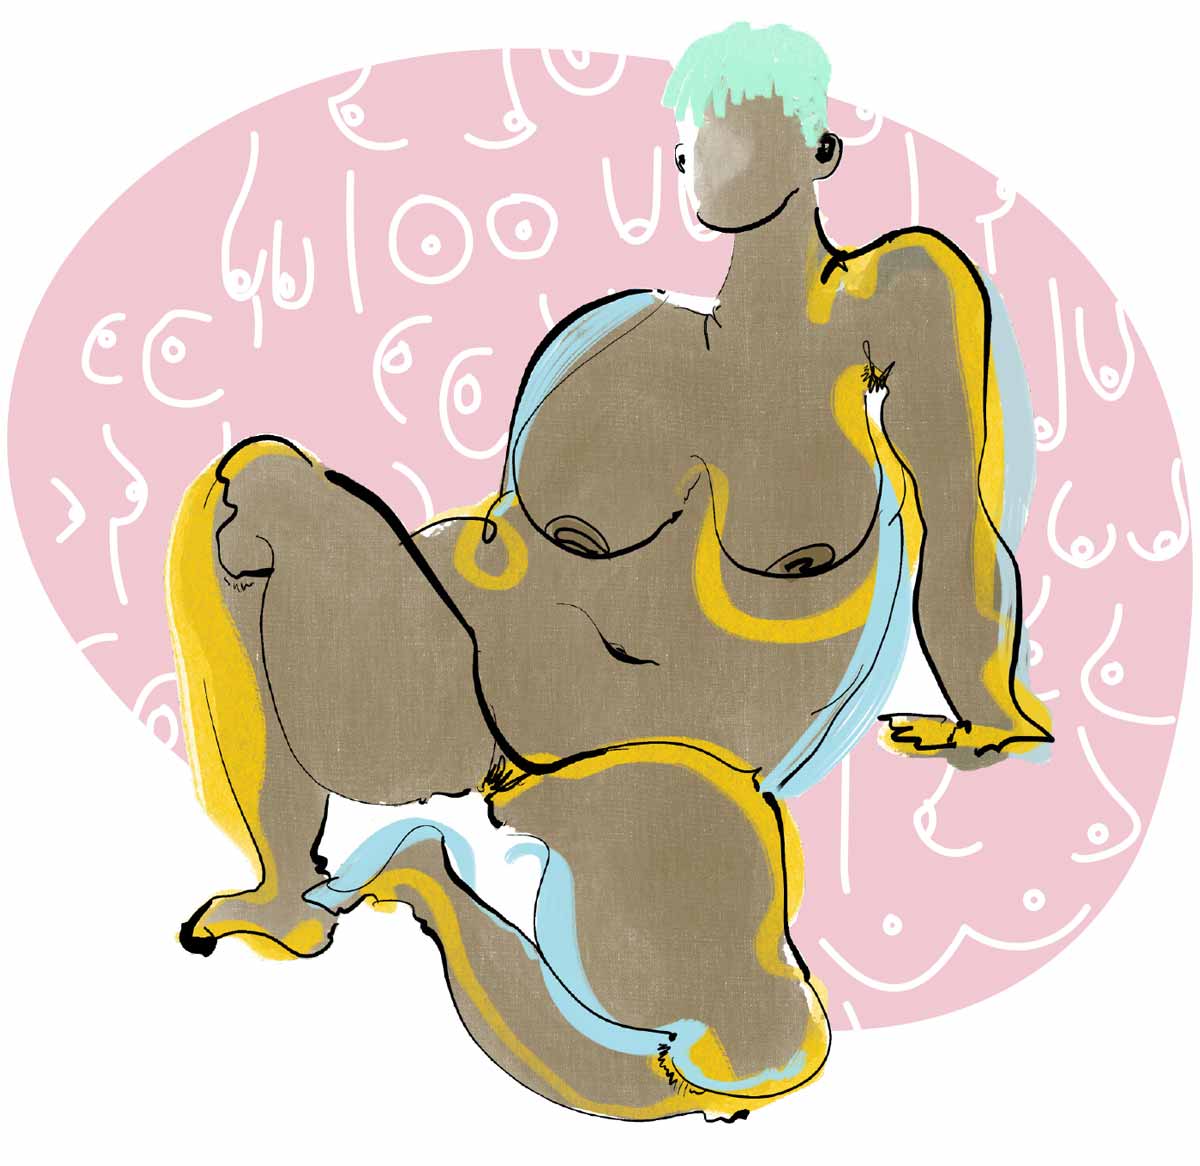 The Boob Whisperer – Mental health – Illustration by In The Nud